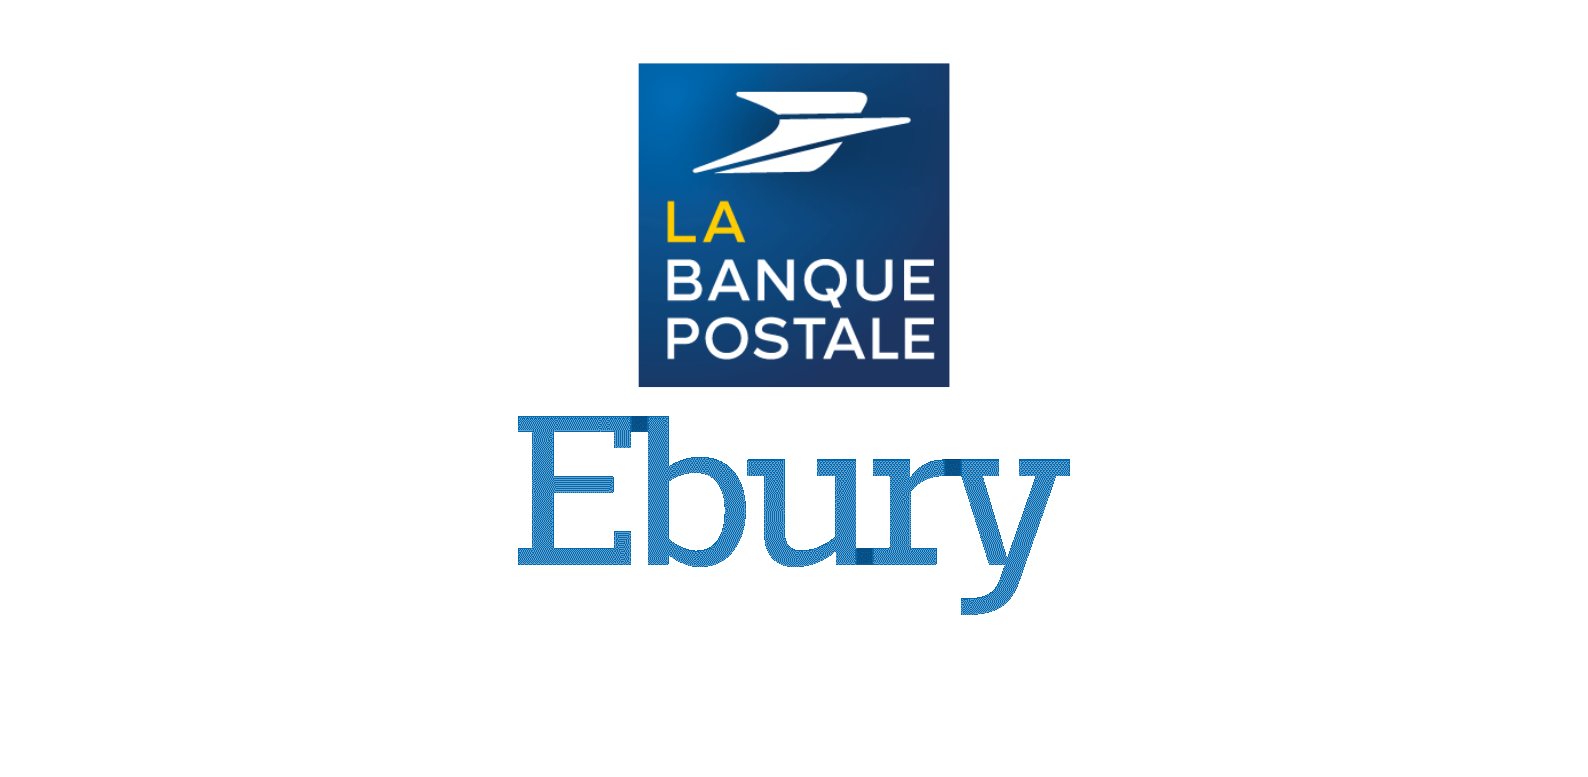 La Banque Postale Chooses Ebury to Support Its SME Customers in Their International Activities 